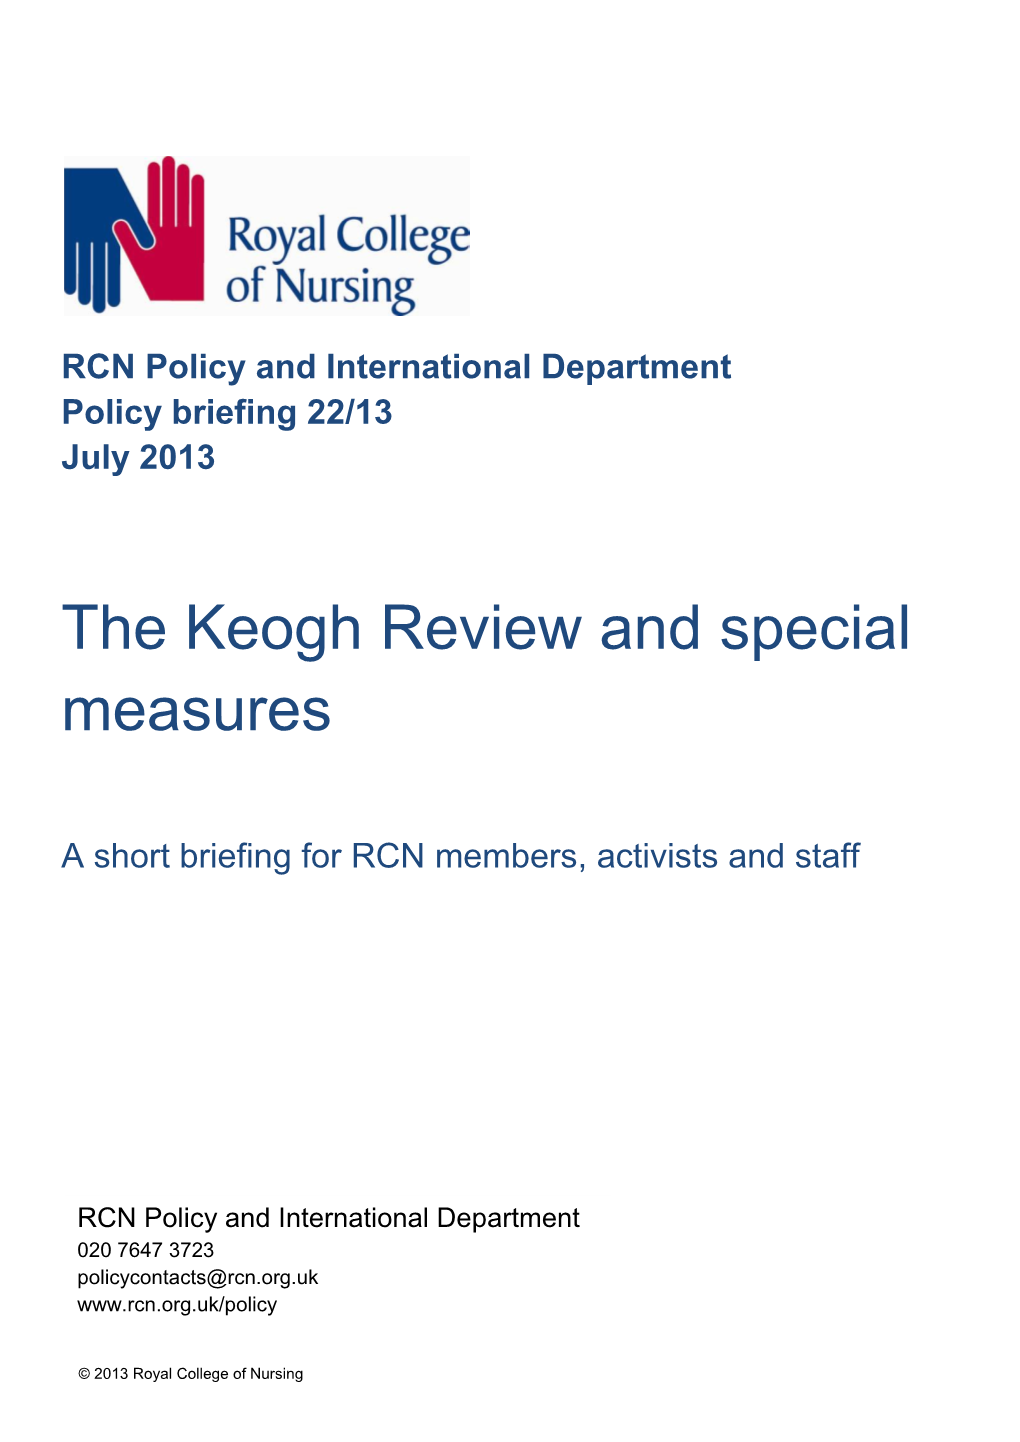 The Keogh Review and Special Measures